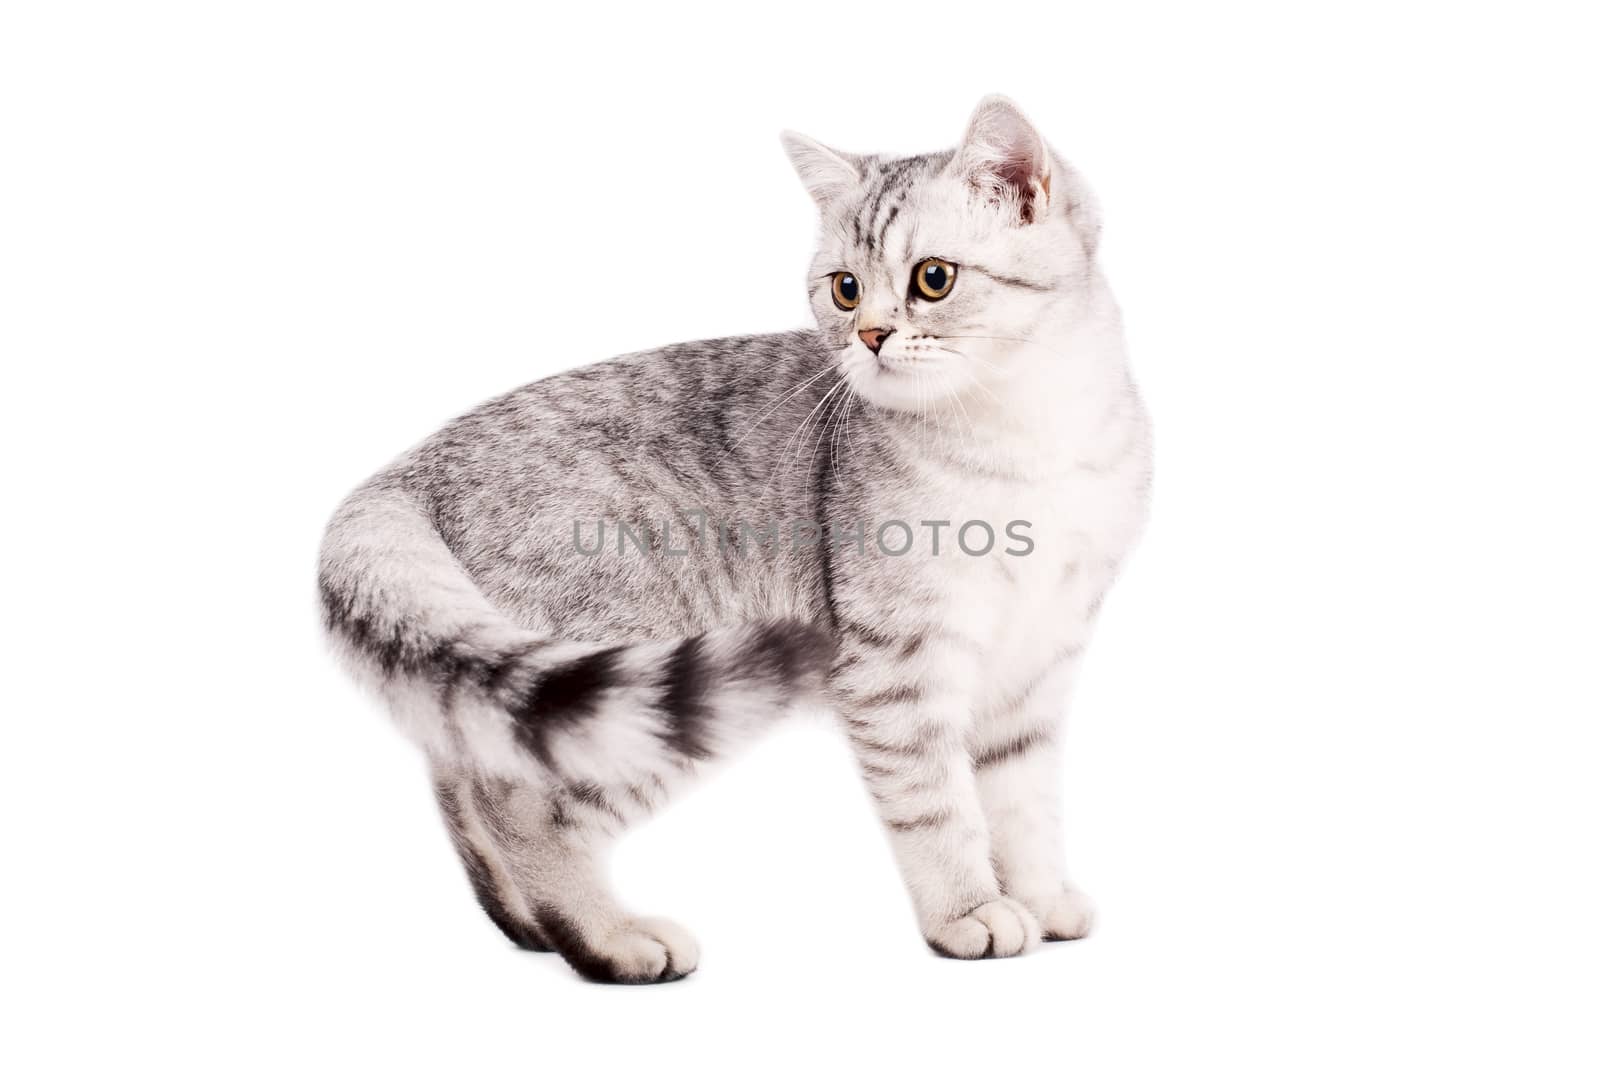 British Shorthaired Cat by deamles